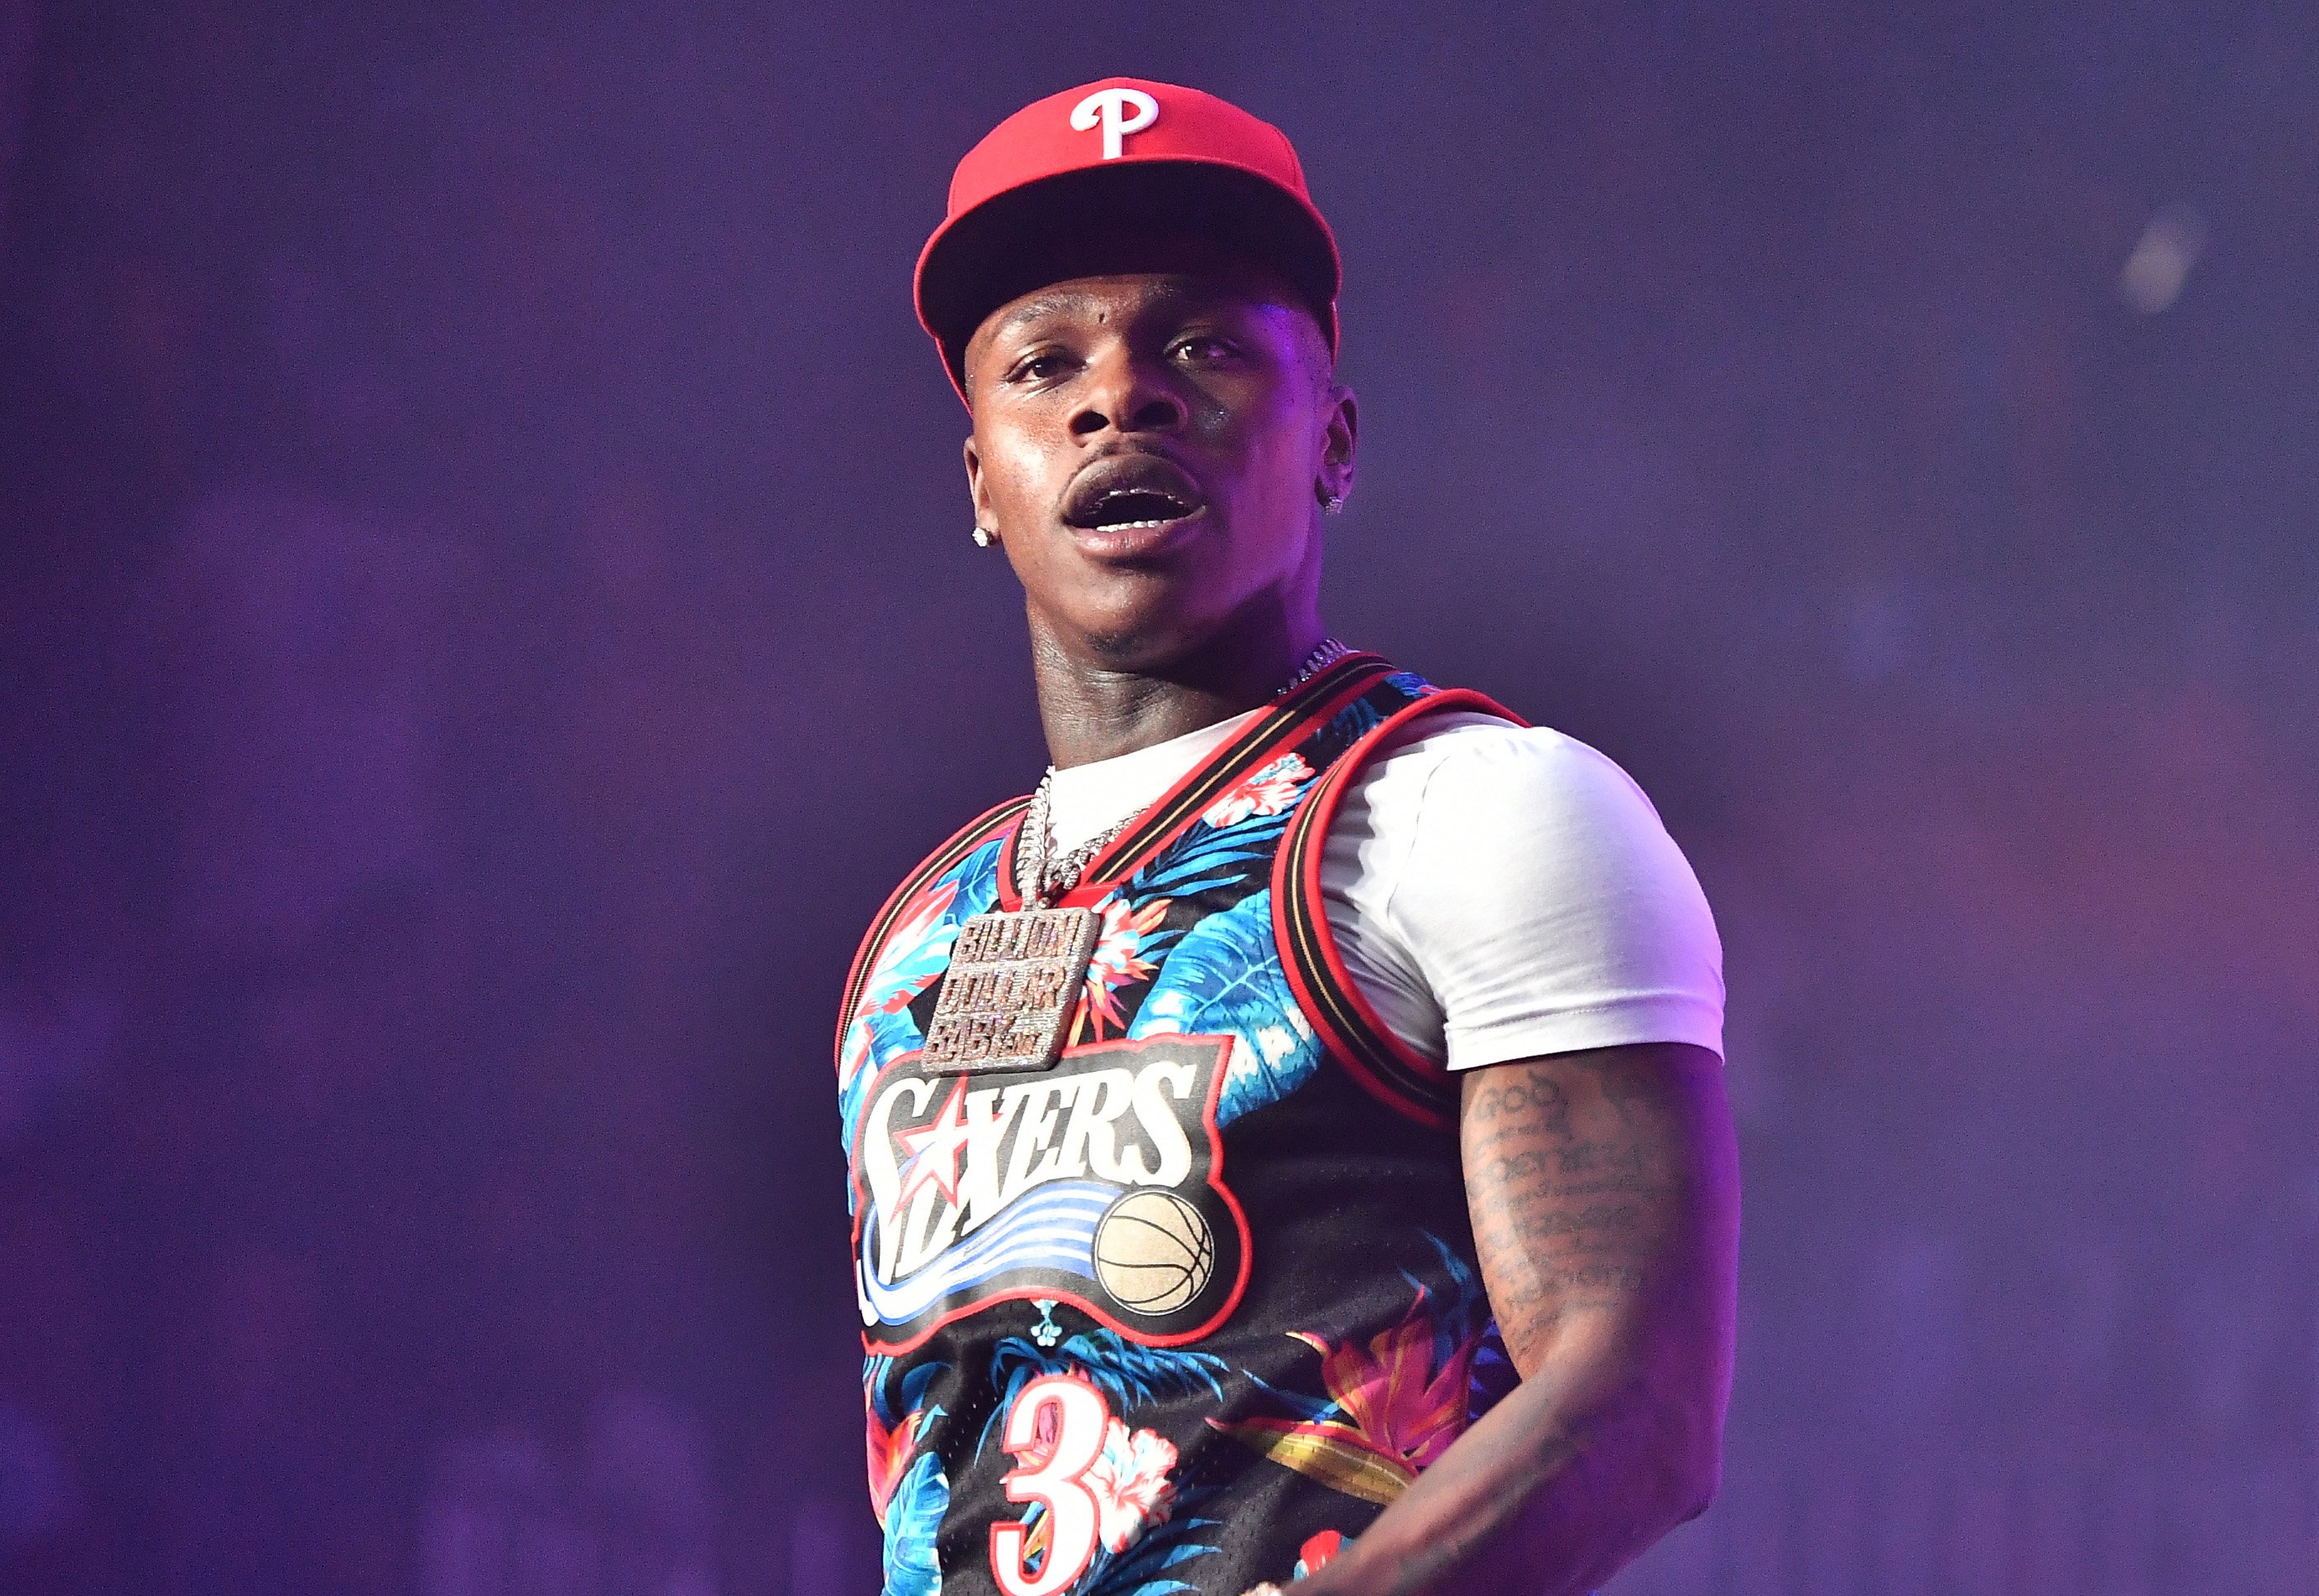 DaBaby wearing a red hat while performing on stage.